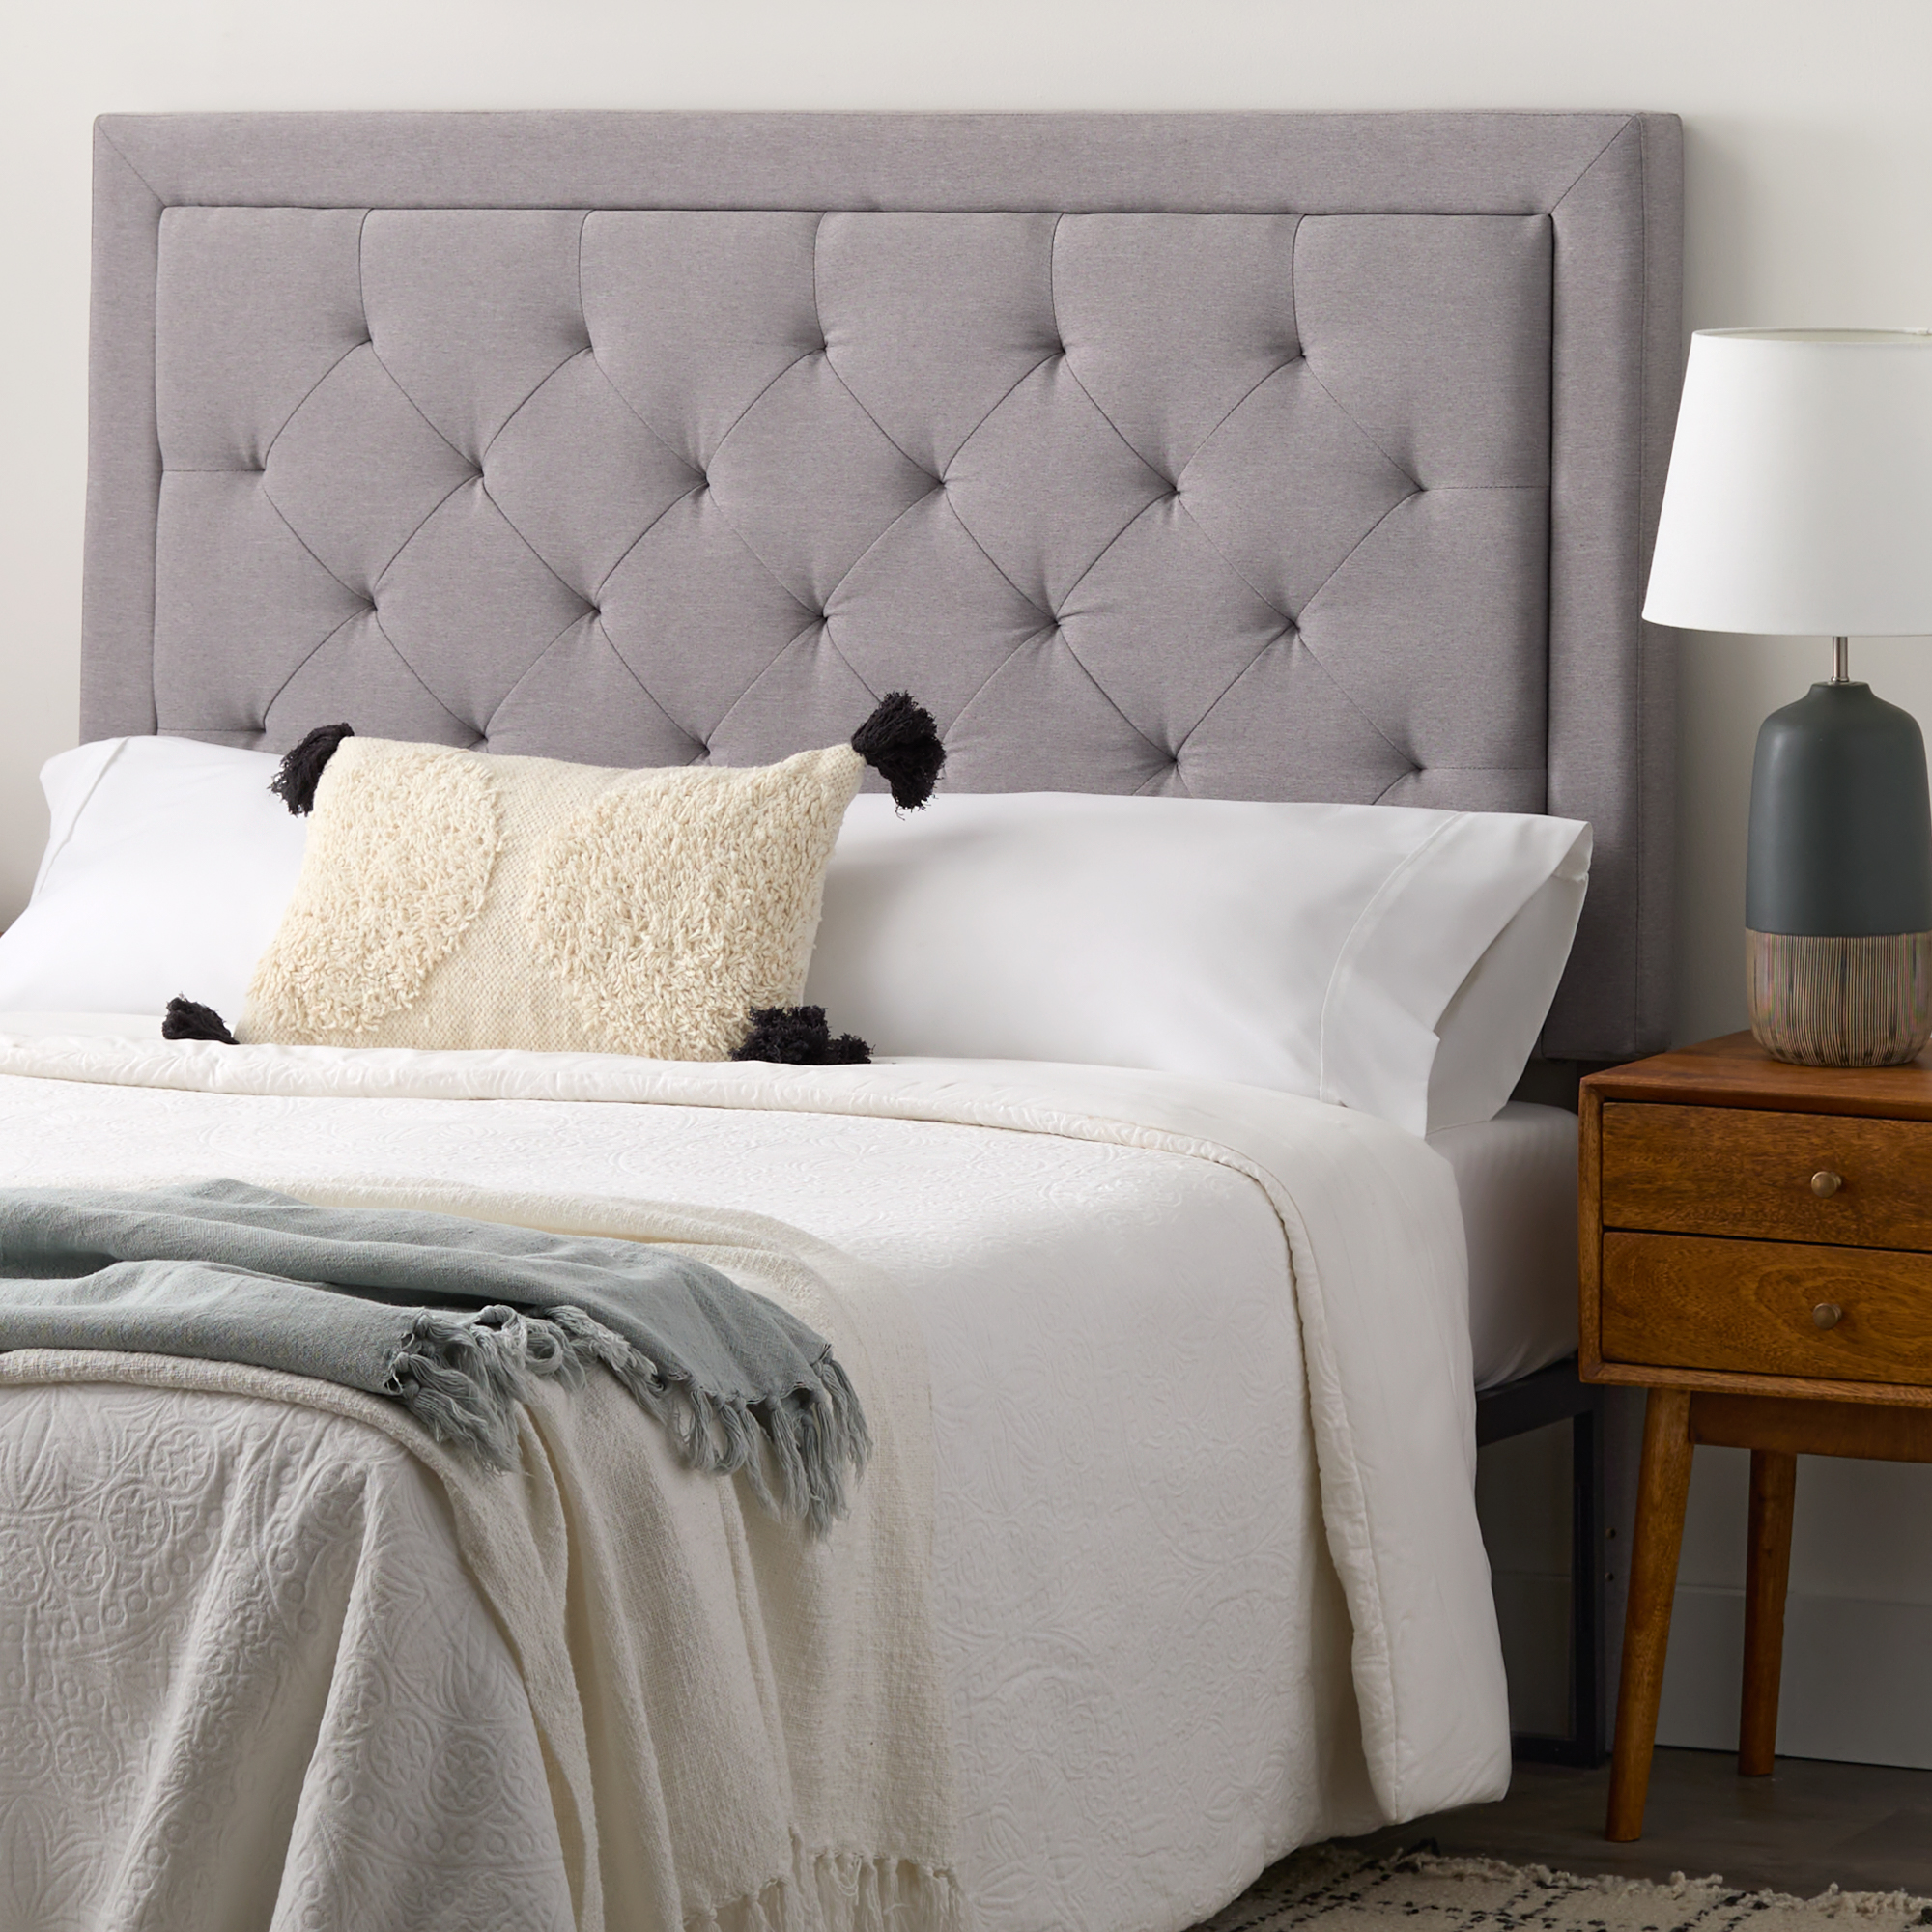 Rest Haven Medford Rectangle Upholstered Headboard with Diamond Tufting, Queen, Gray - image 1 of 12